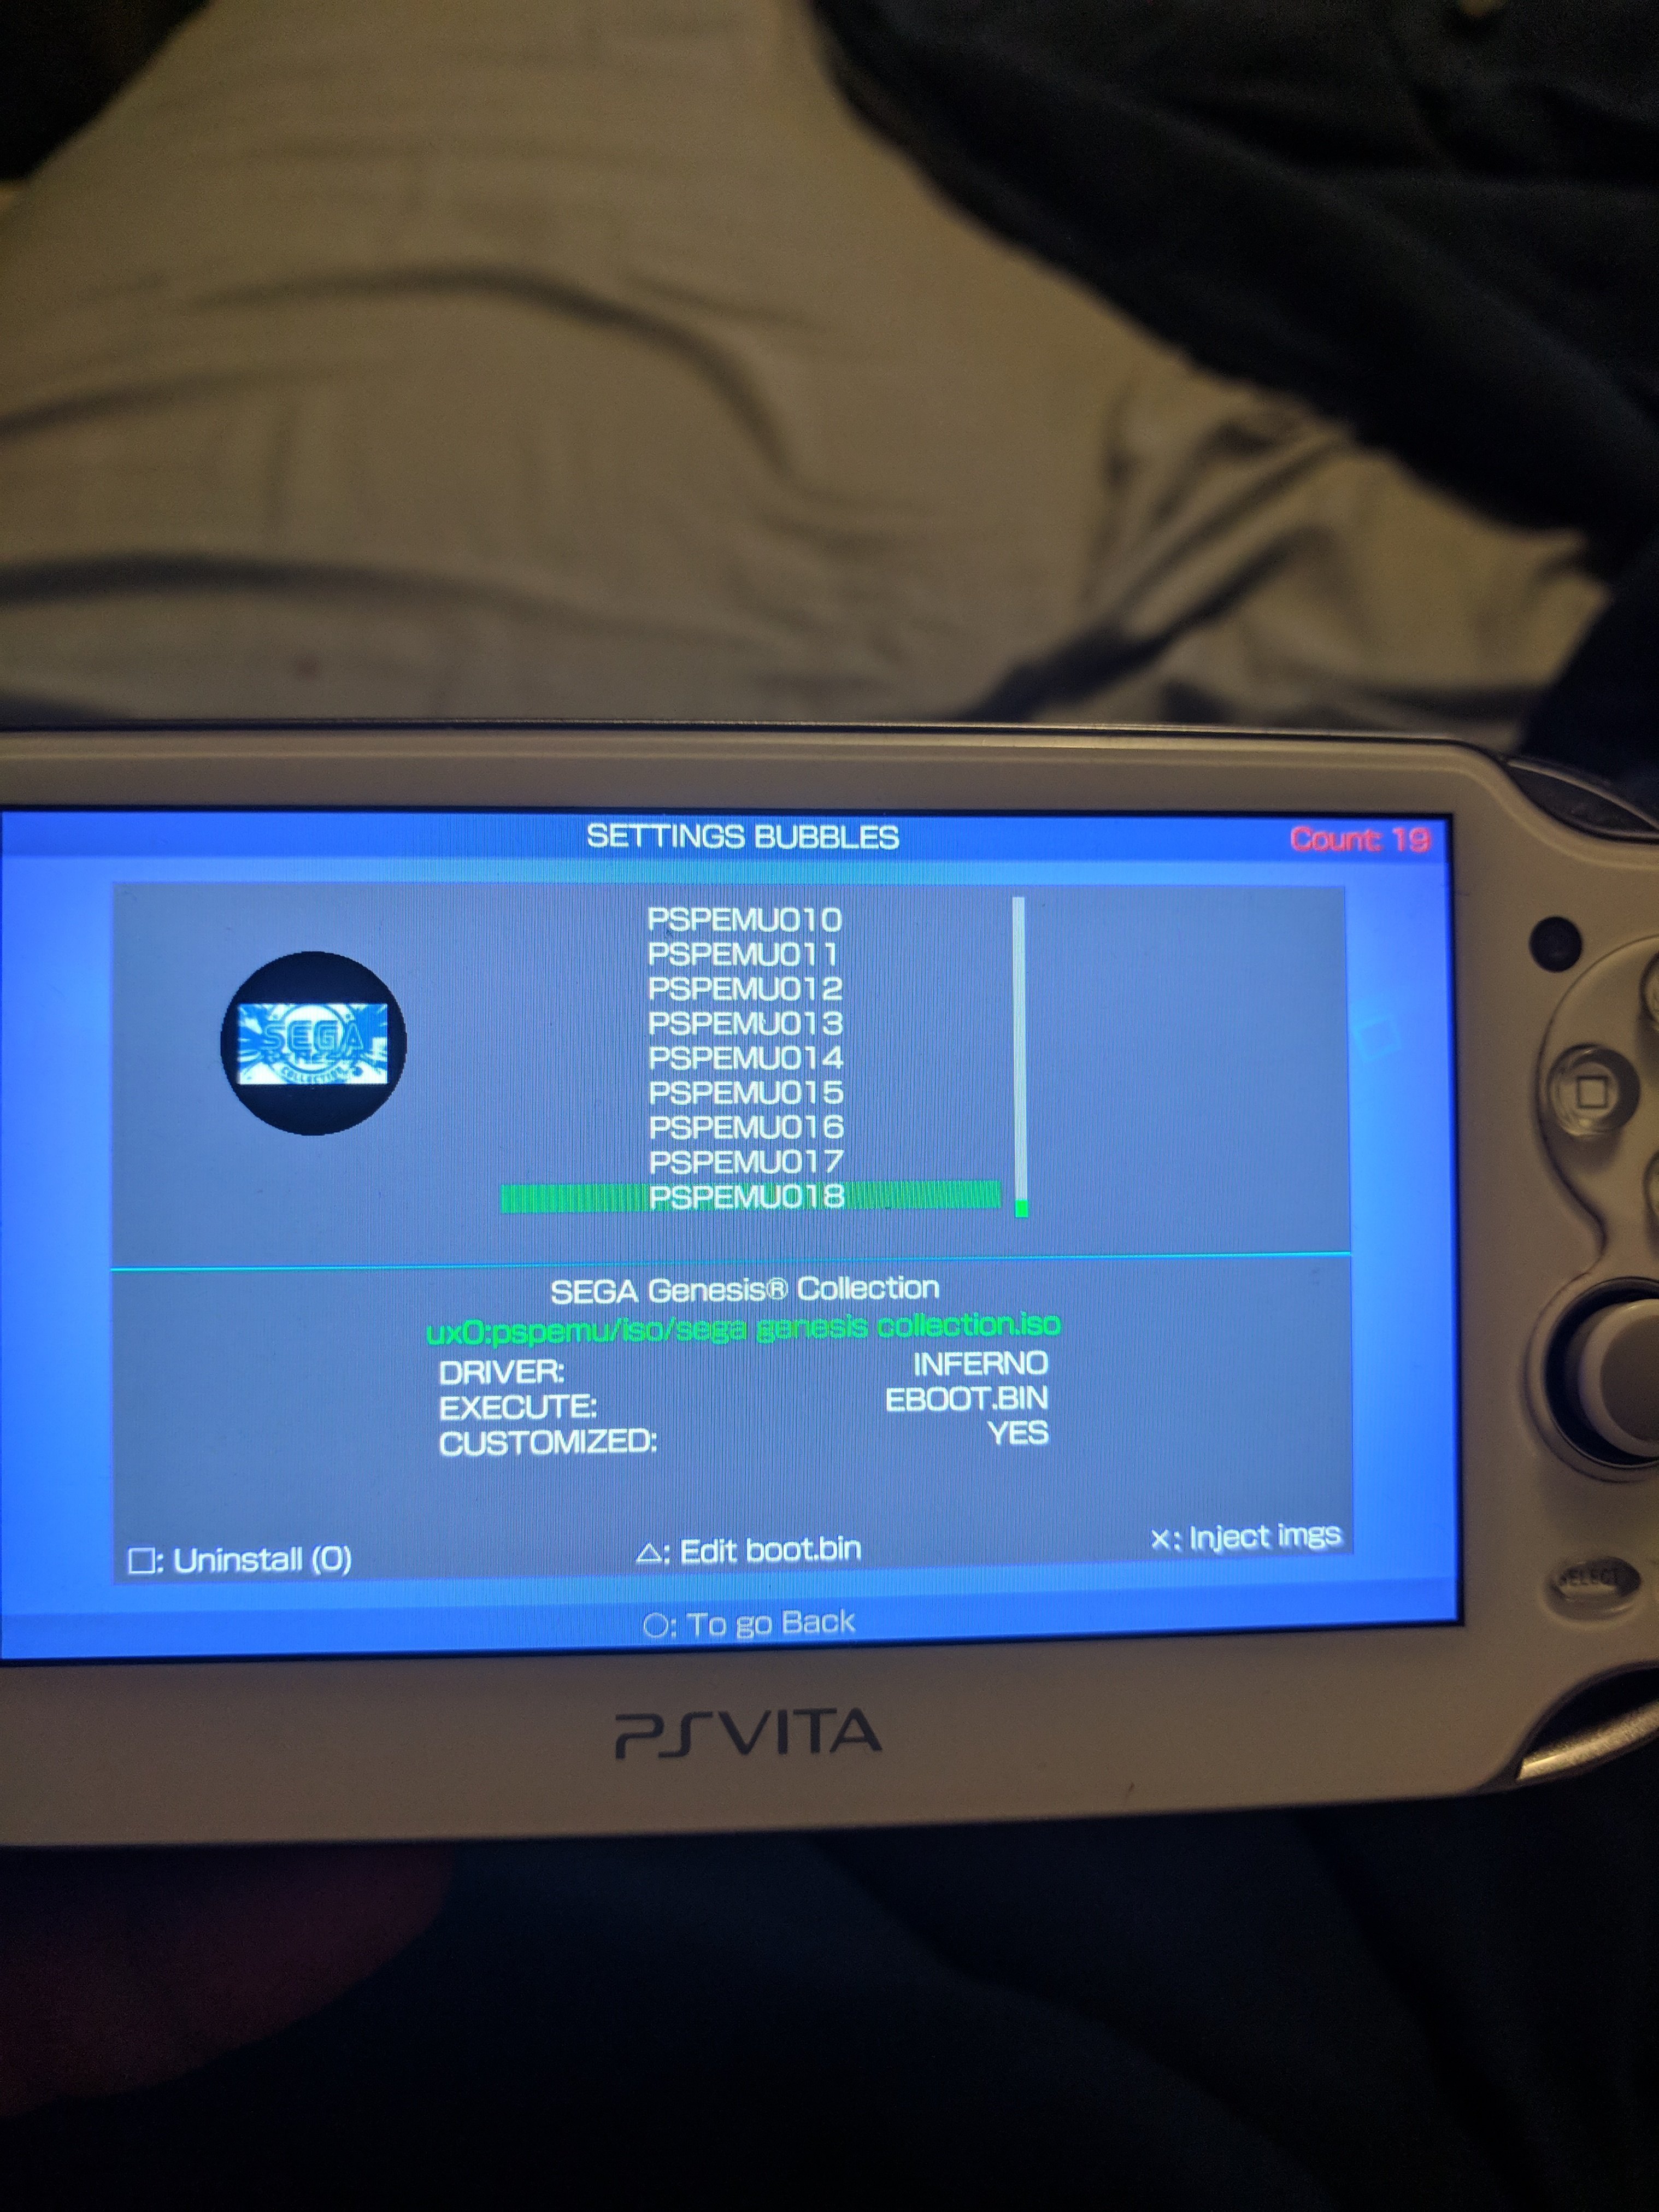 Bubble Manager installed PSP: Sega Genesis Collection crashes and loads PSP XMB | - The Independent Video Game Community